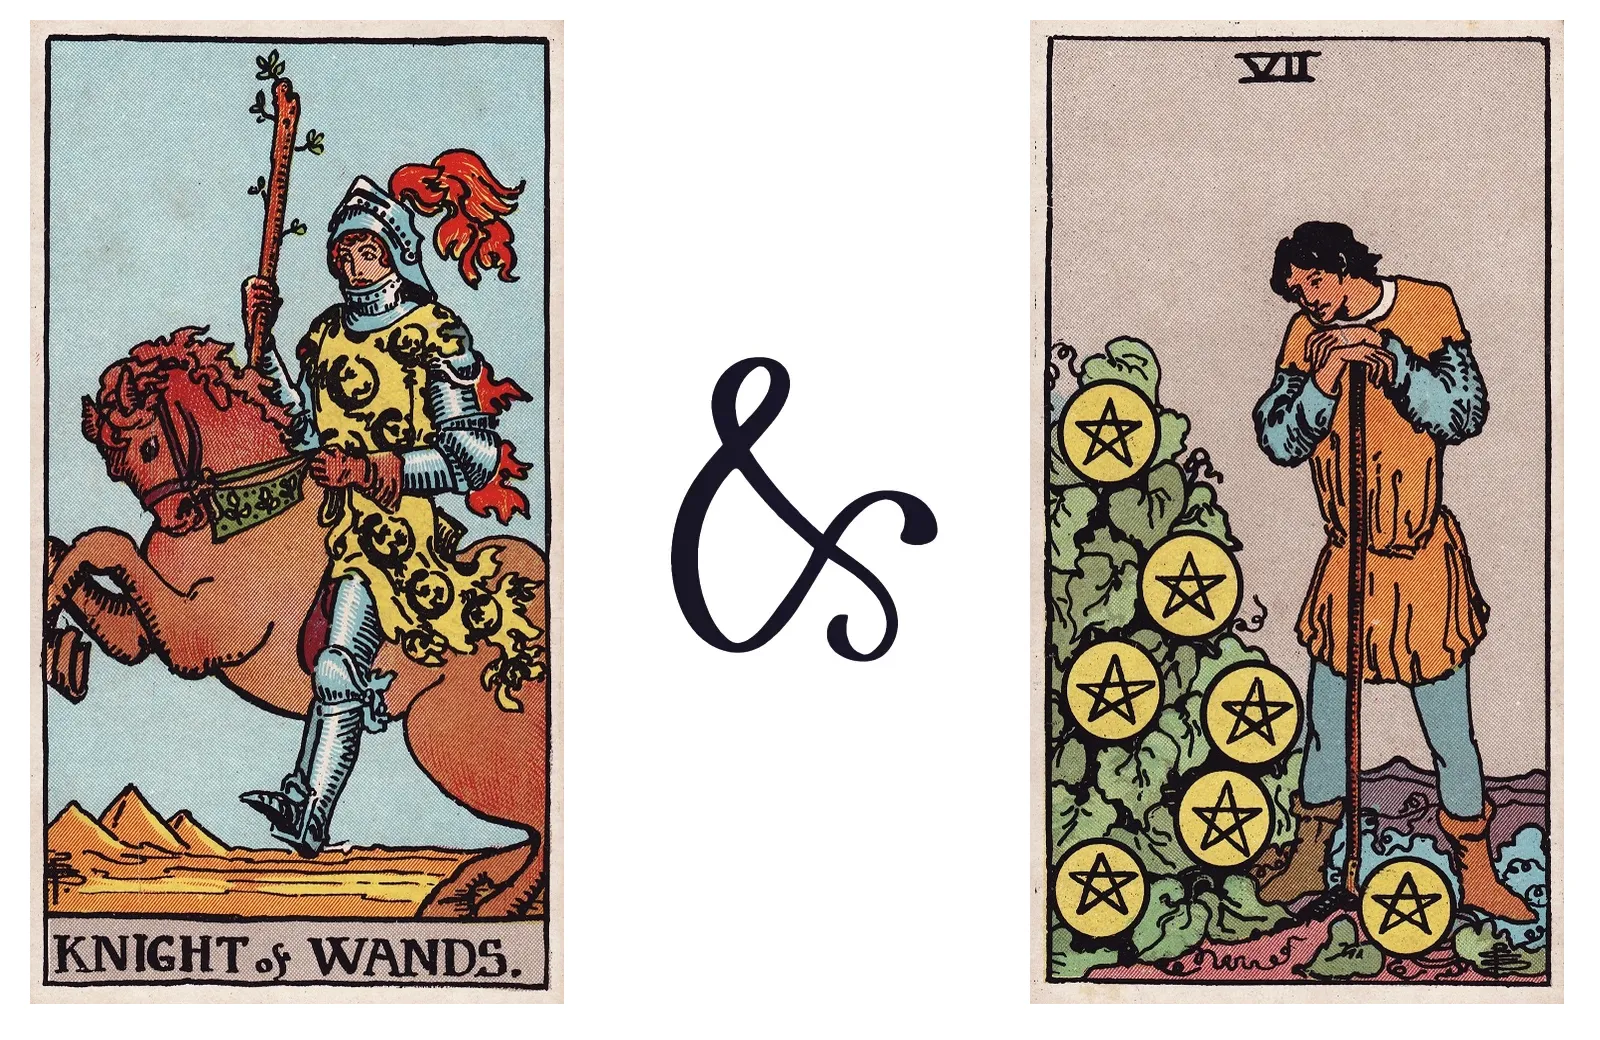 Knight of Wands and Seven of Pentacles